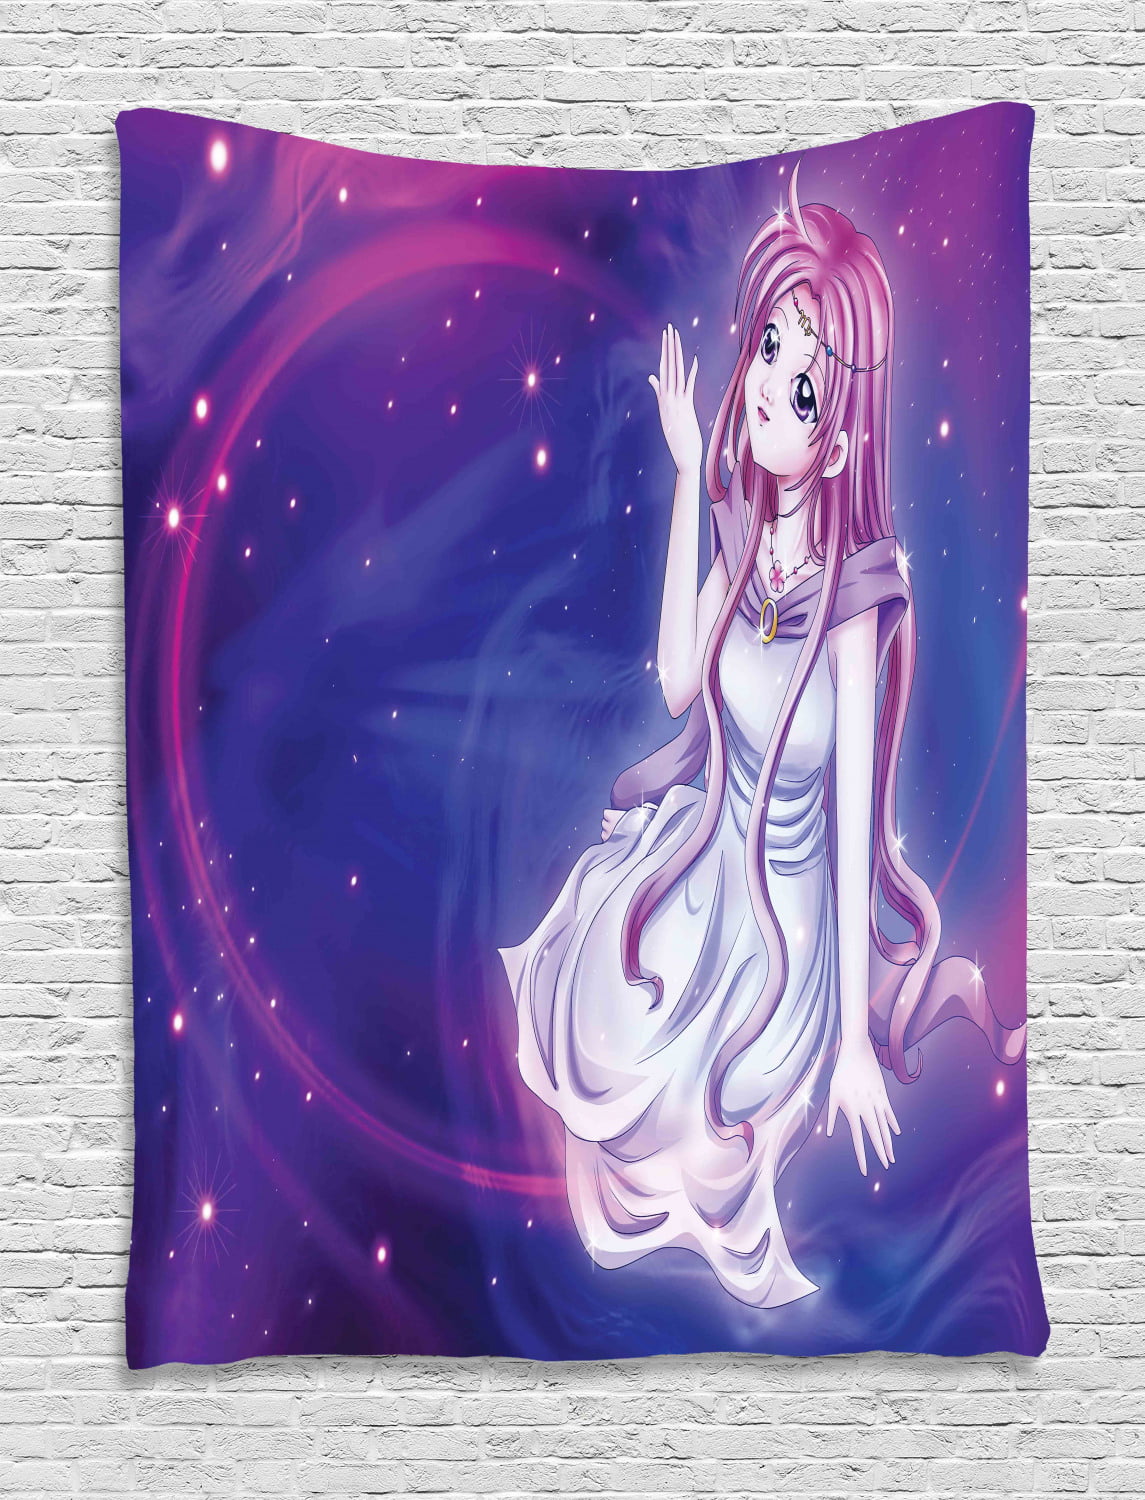 Anime Tapestry Cute Purple Anime Fairy Sitting In Theme Of Zodiac Astrology Horoscope Sign Artprint Wall Hanging For Bedroom Living Room Dorm Decor 40w X 60l Inches Purple Blue By Ambesonne